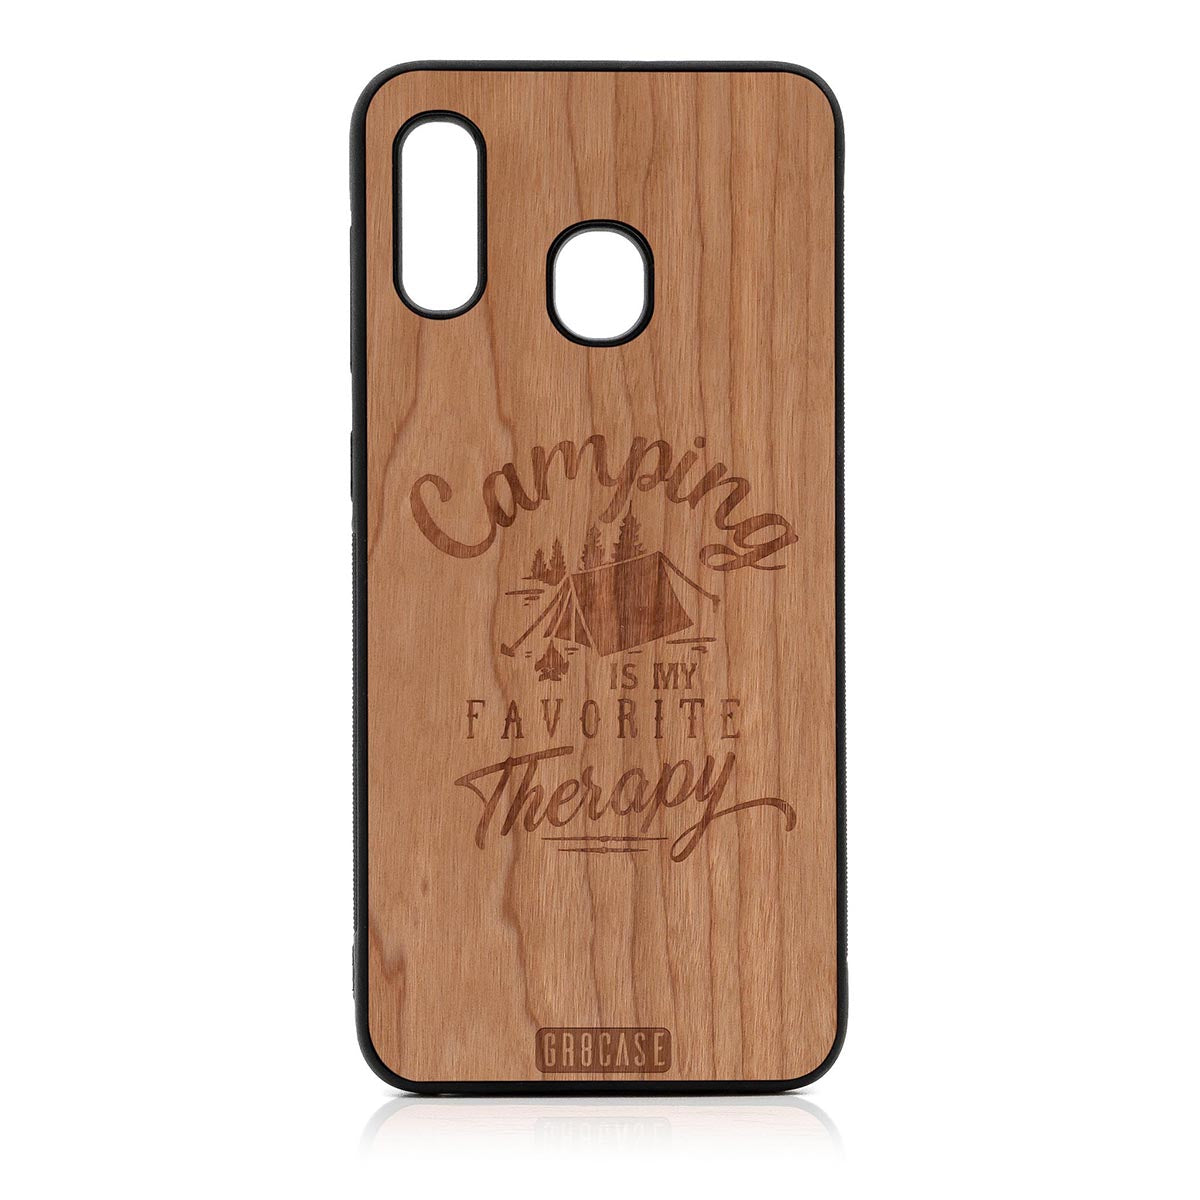 Camping Is My Favorite Therapy Design Wood Case For Samsung Galaxy A20 by GR8CASE